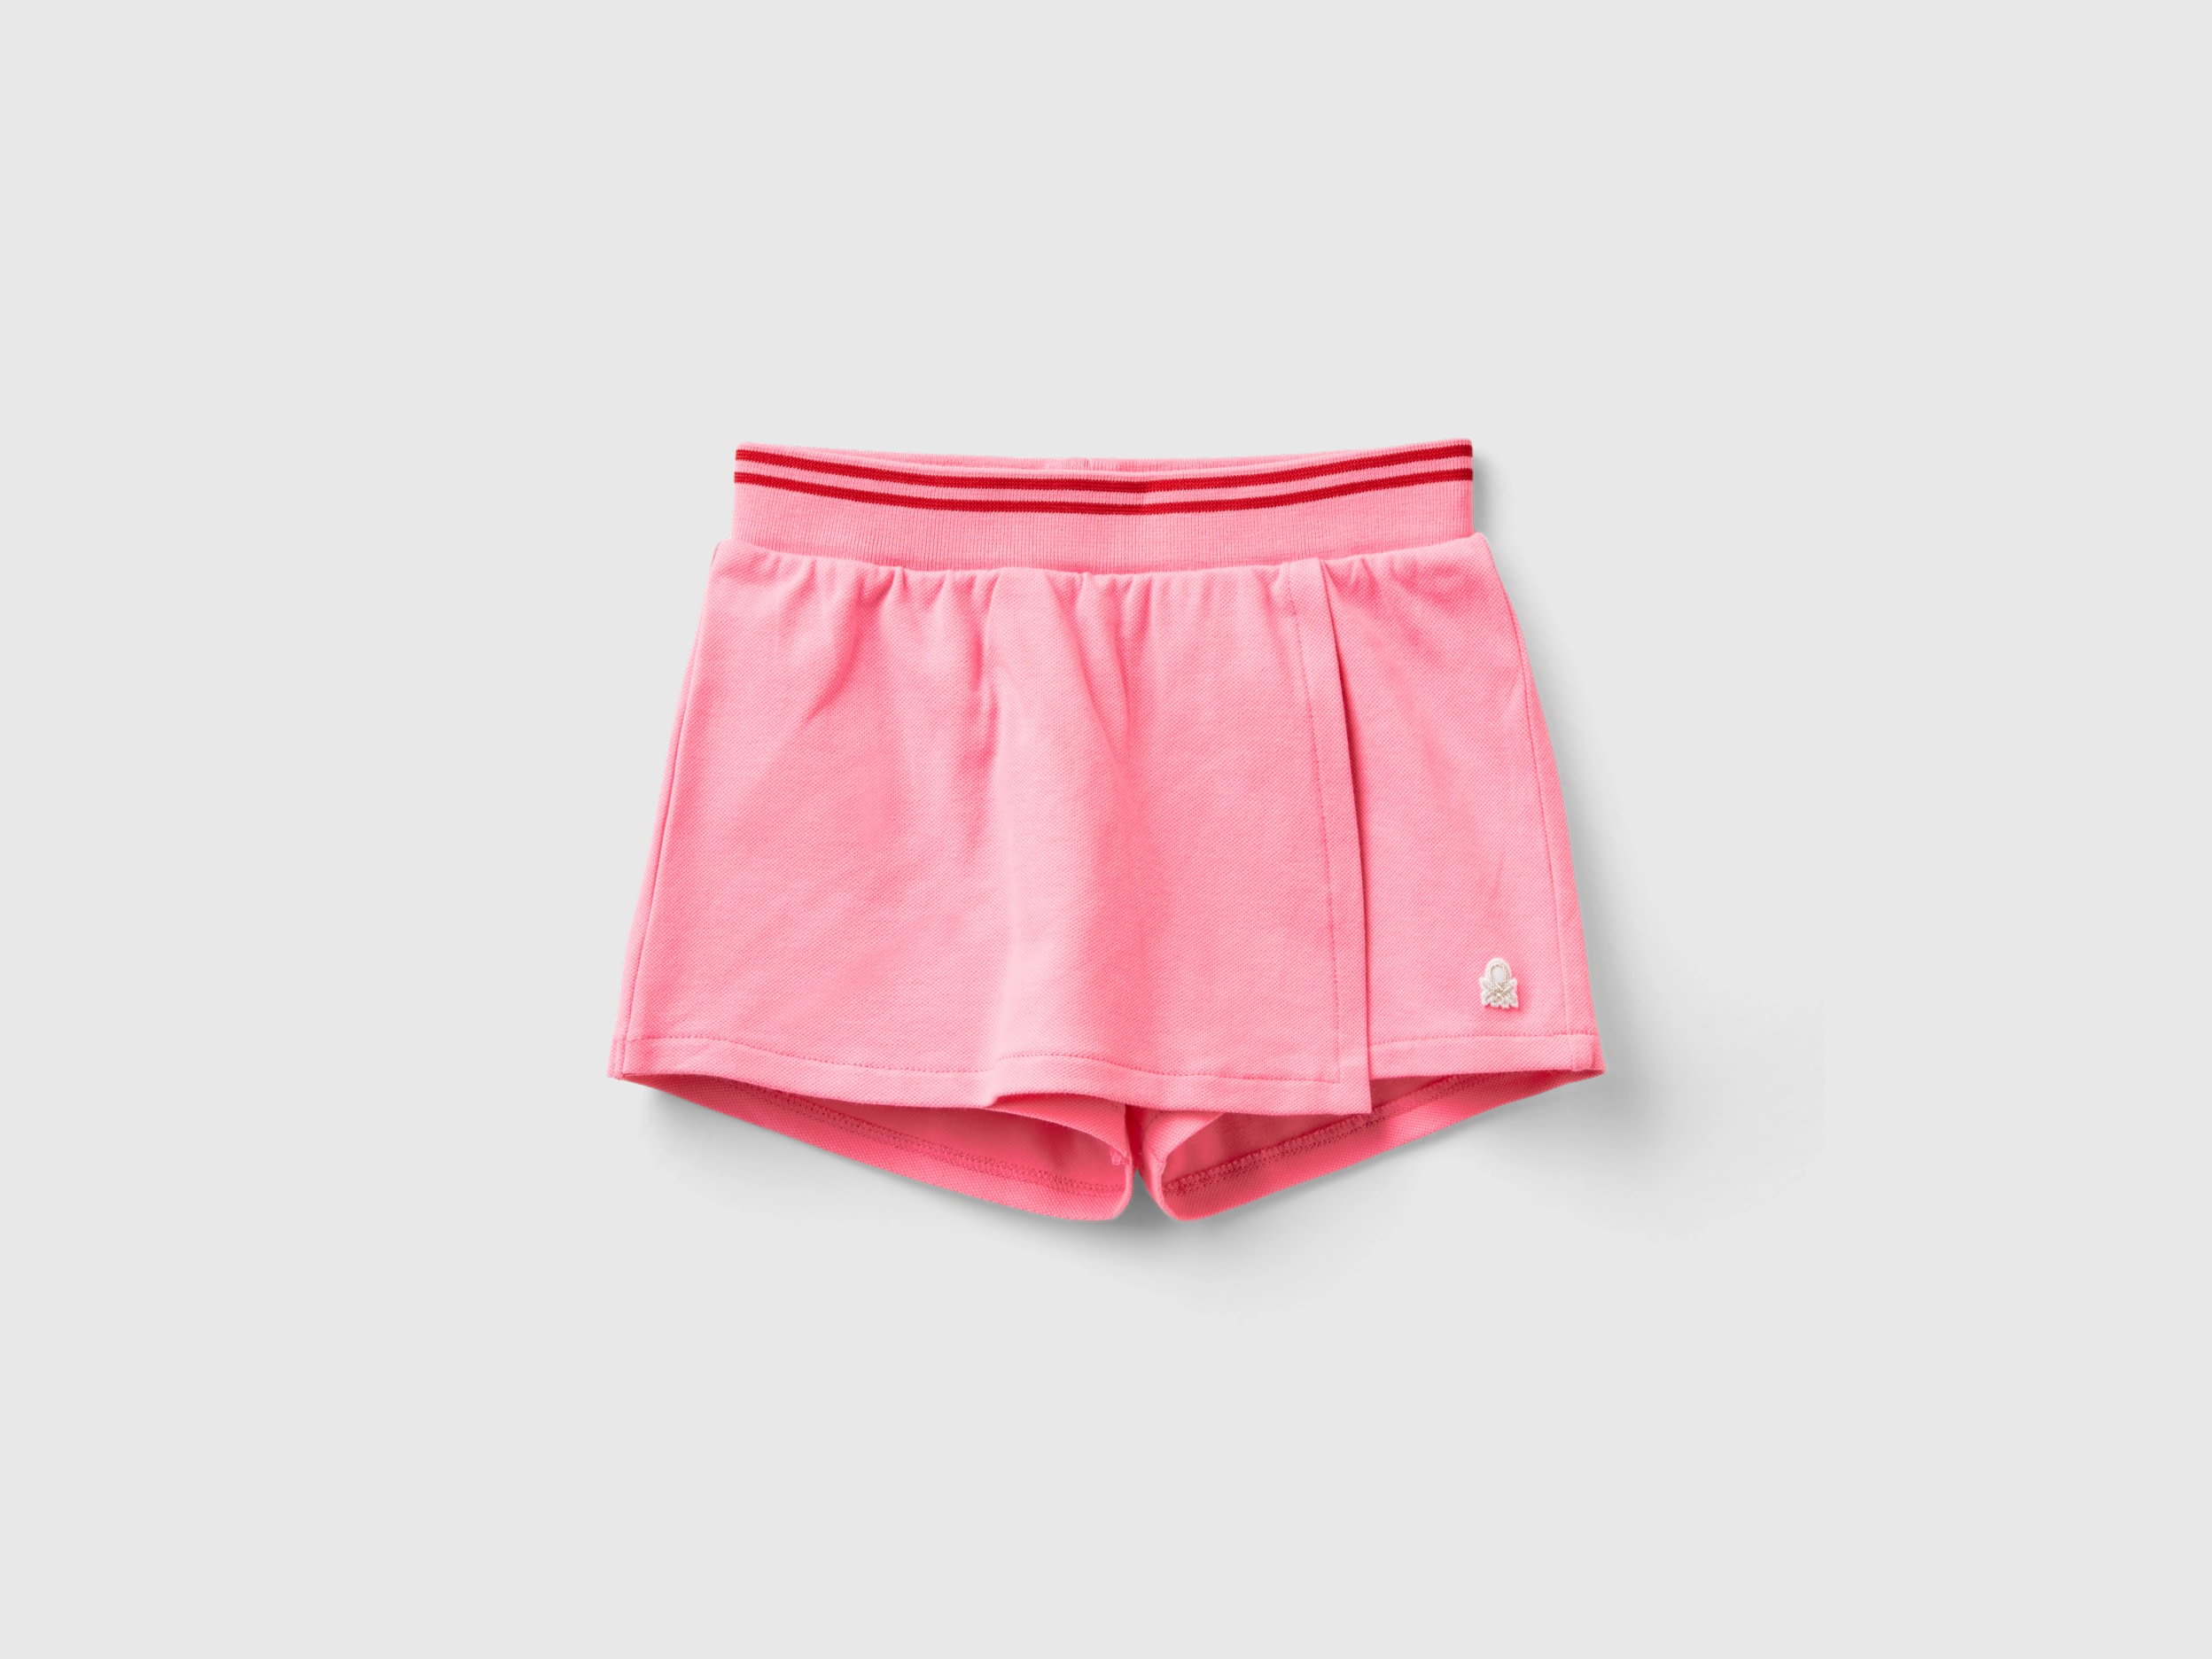 Image of Benetton, Stretch Organic Cotton Culottes, size 82, Pink, Kids